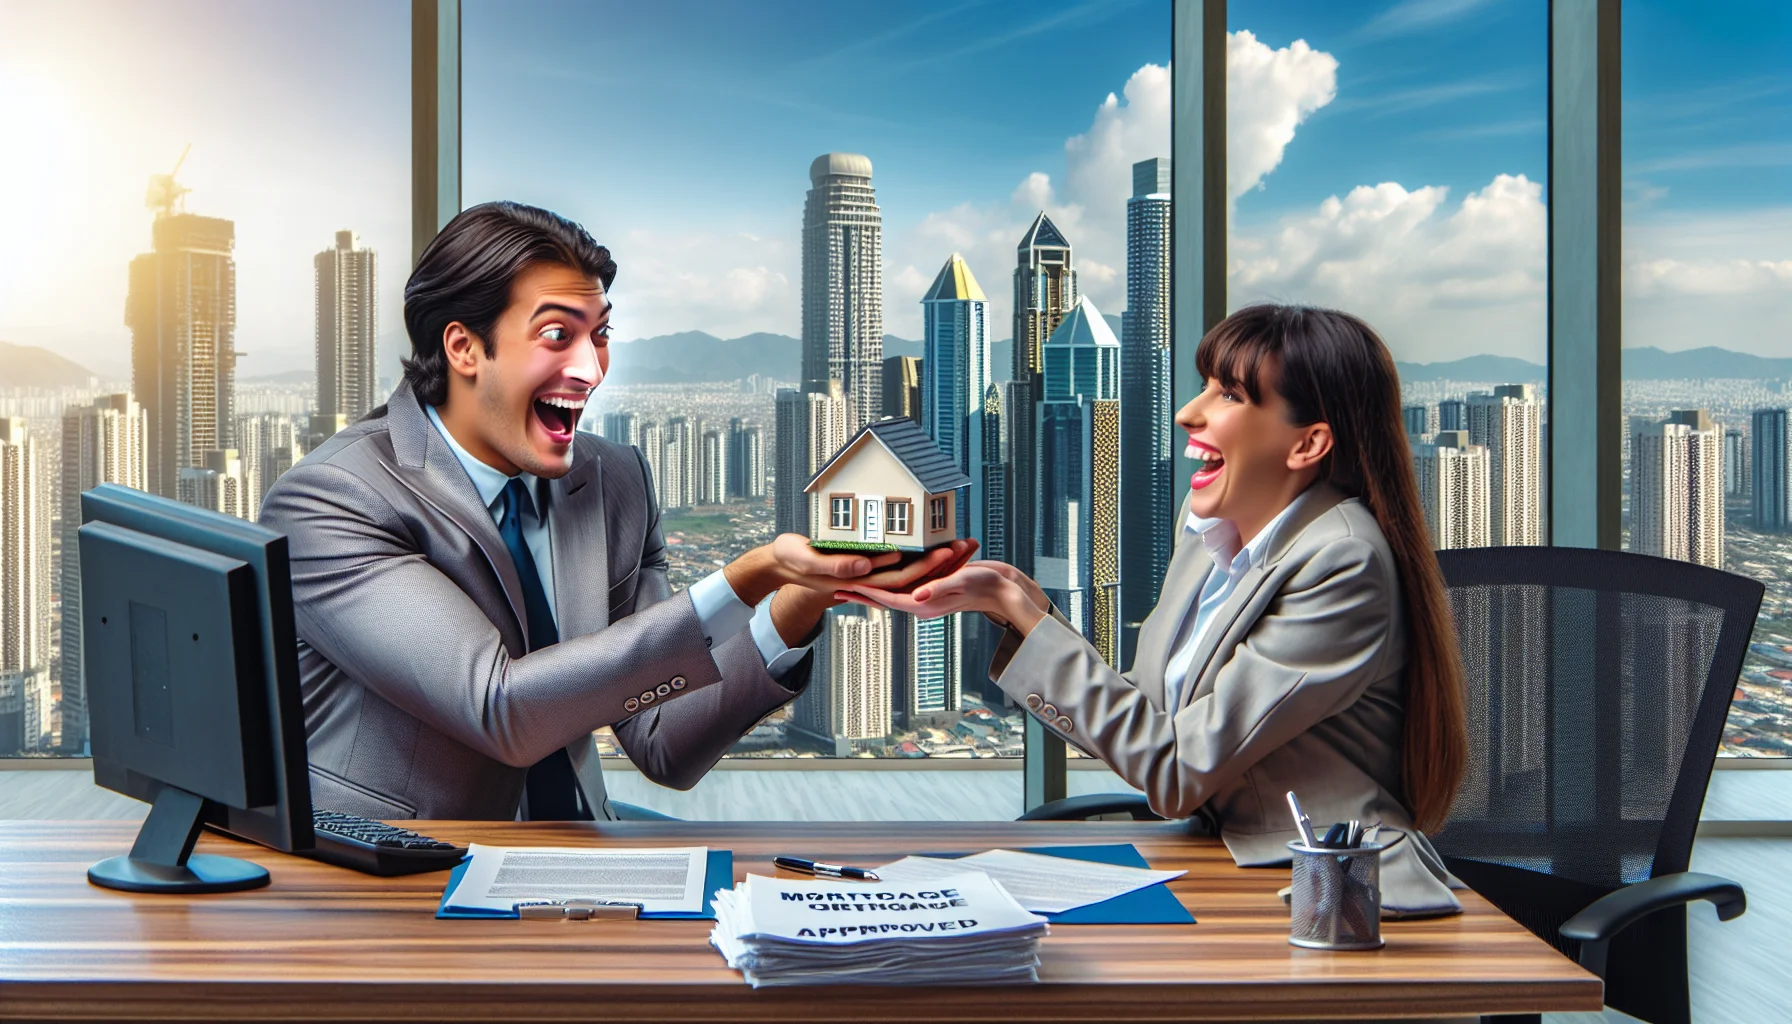 Create a humor-filled image that captures the ideal scenario of handling a mortgage in real estate. In this scene, an extremely happy Middle-Eastern male banker hands over a tiny house model to a cheerful Caucasian woman who's a first-time home buyer. Both are seated in a vibrant, well-lit office featuring a panoramic view of an urban landscape filled with towering buildings. The image also displays a computer monitor which shows a 'Mortgage Approved' message, paperwork, and a sign reading 'Zero Down Payment'. The atmosphere is light-hearted, symbolizing the absence of stress usually associated with mortgages and real estate.